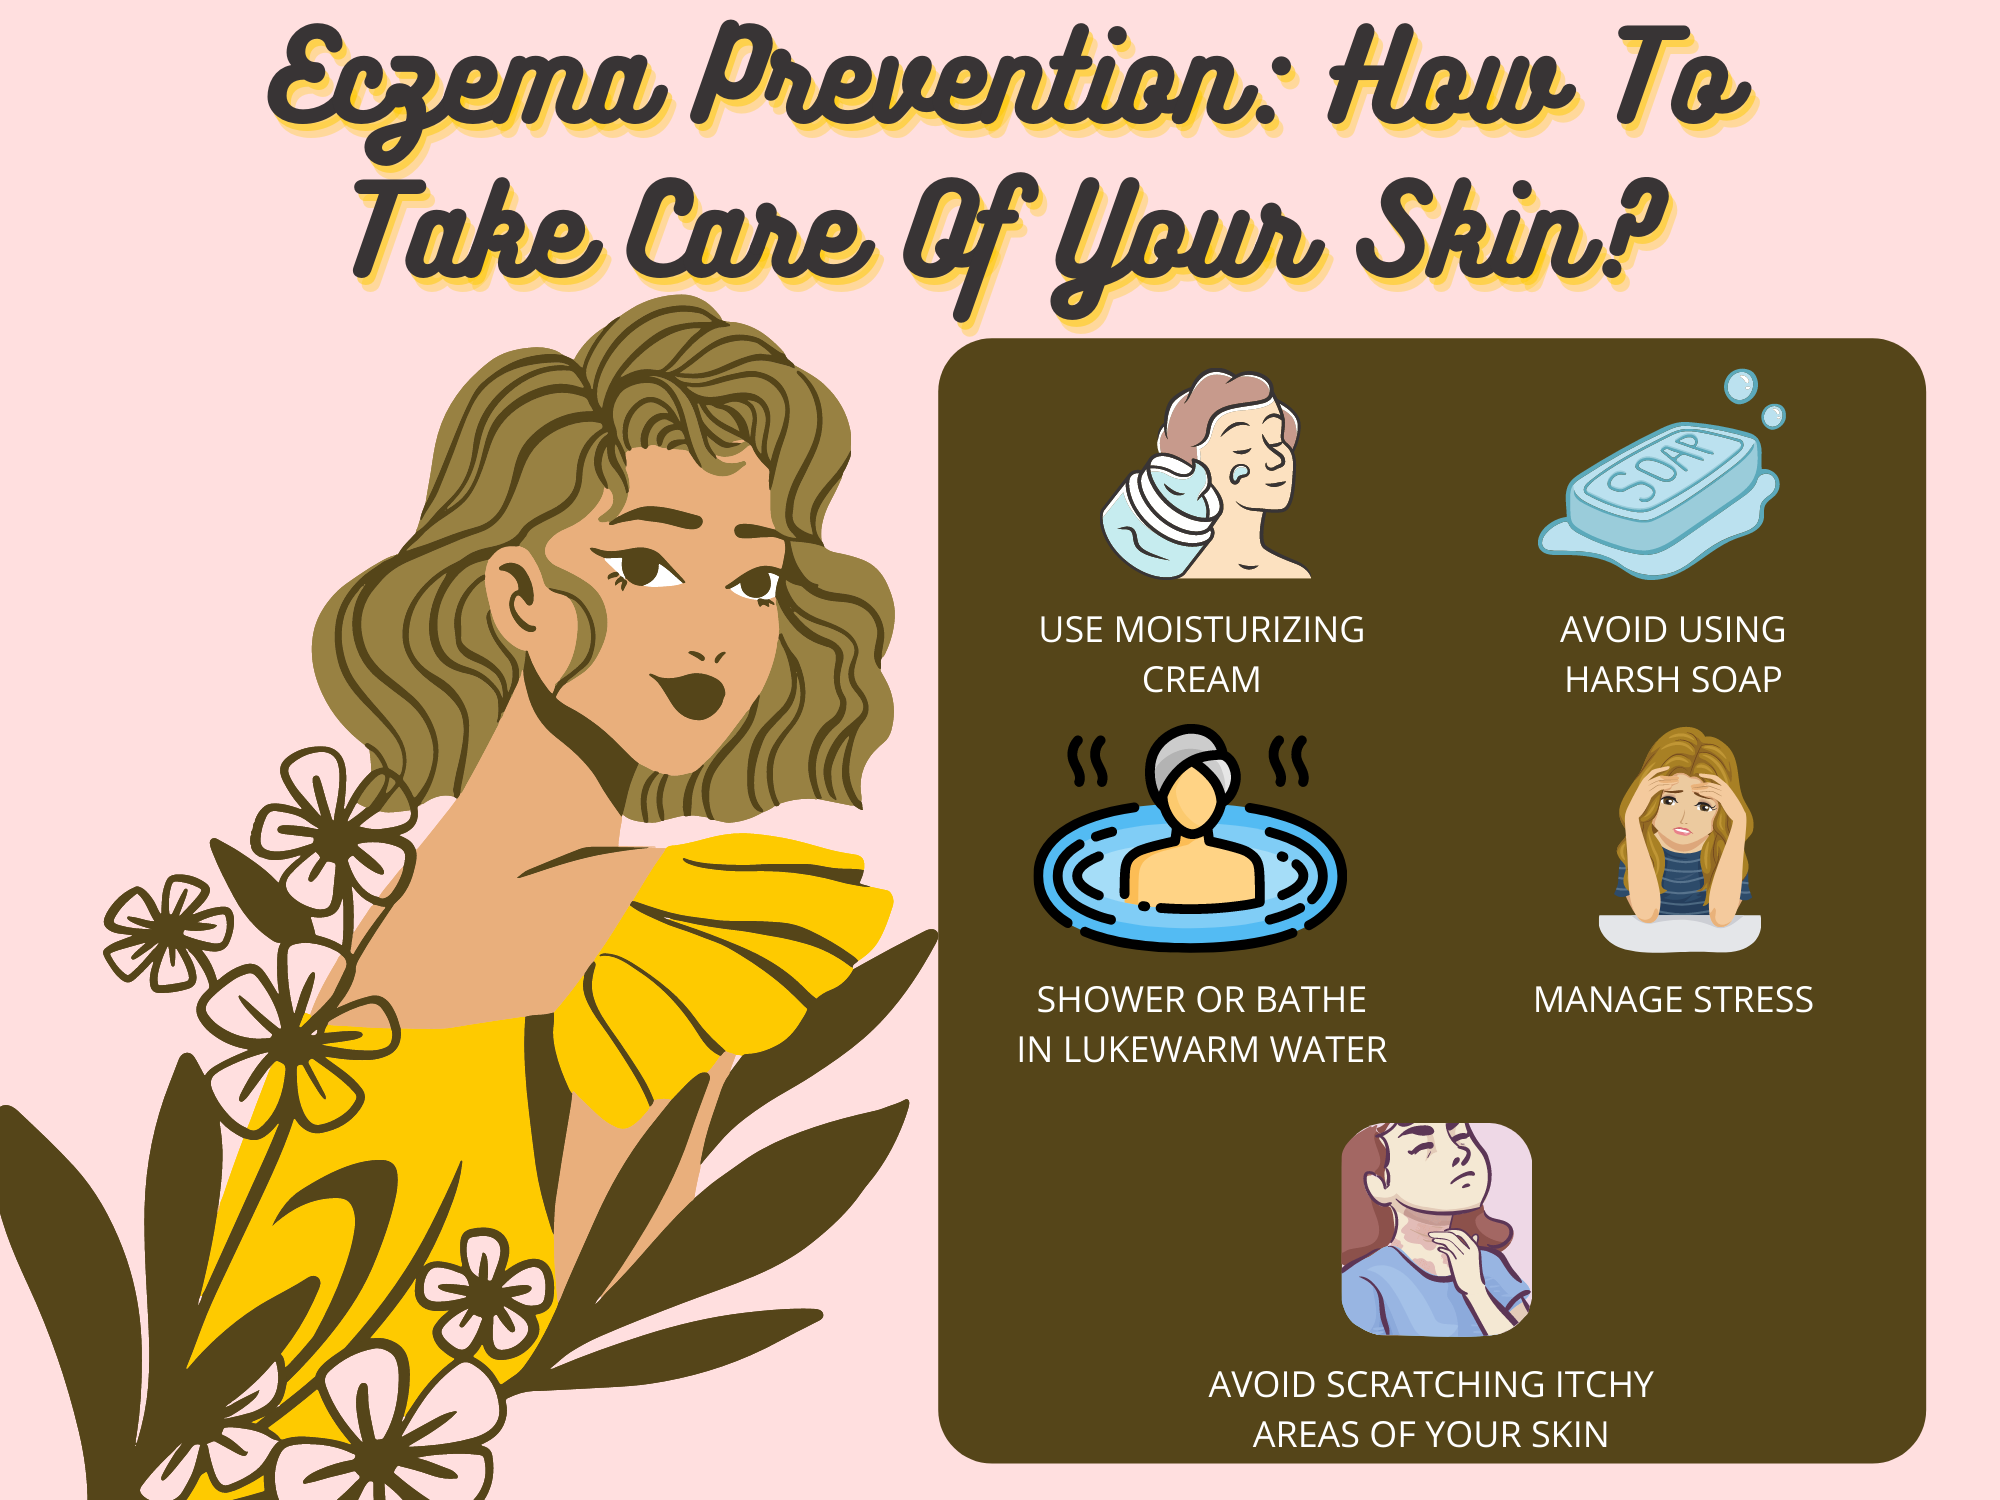 Eczema Prevention: How To Take Care Of Your Skin? - 100% Health